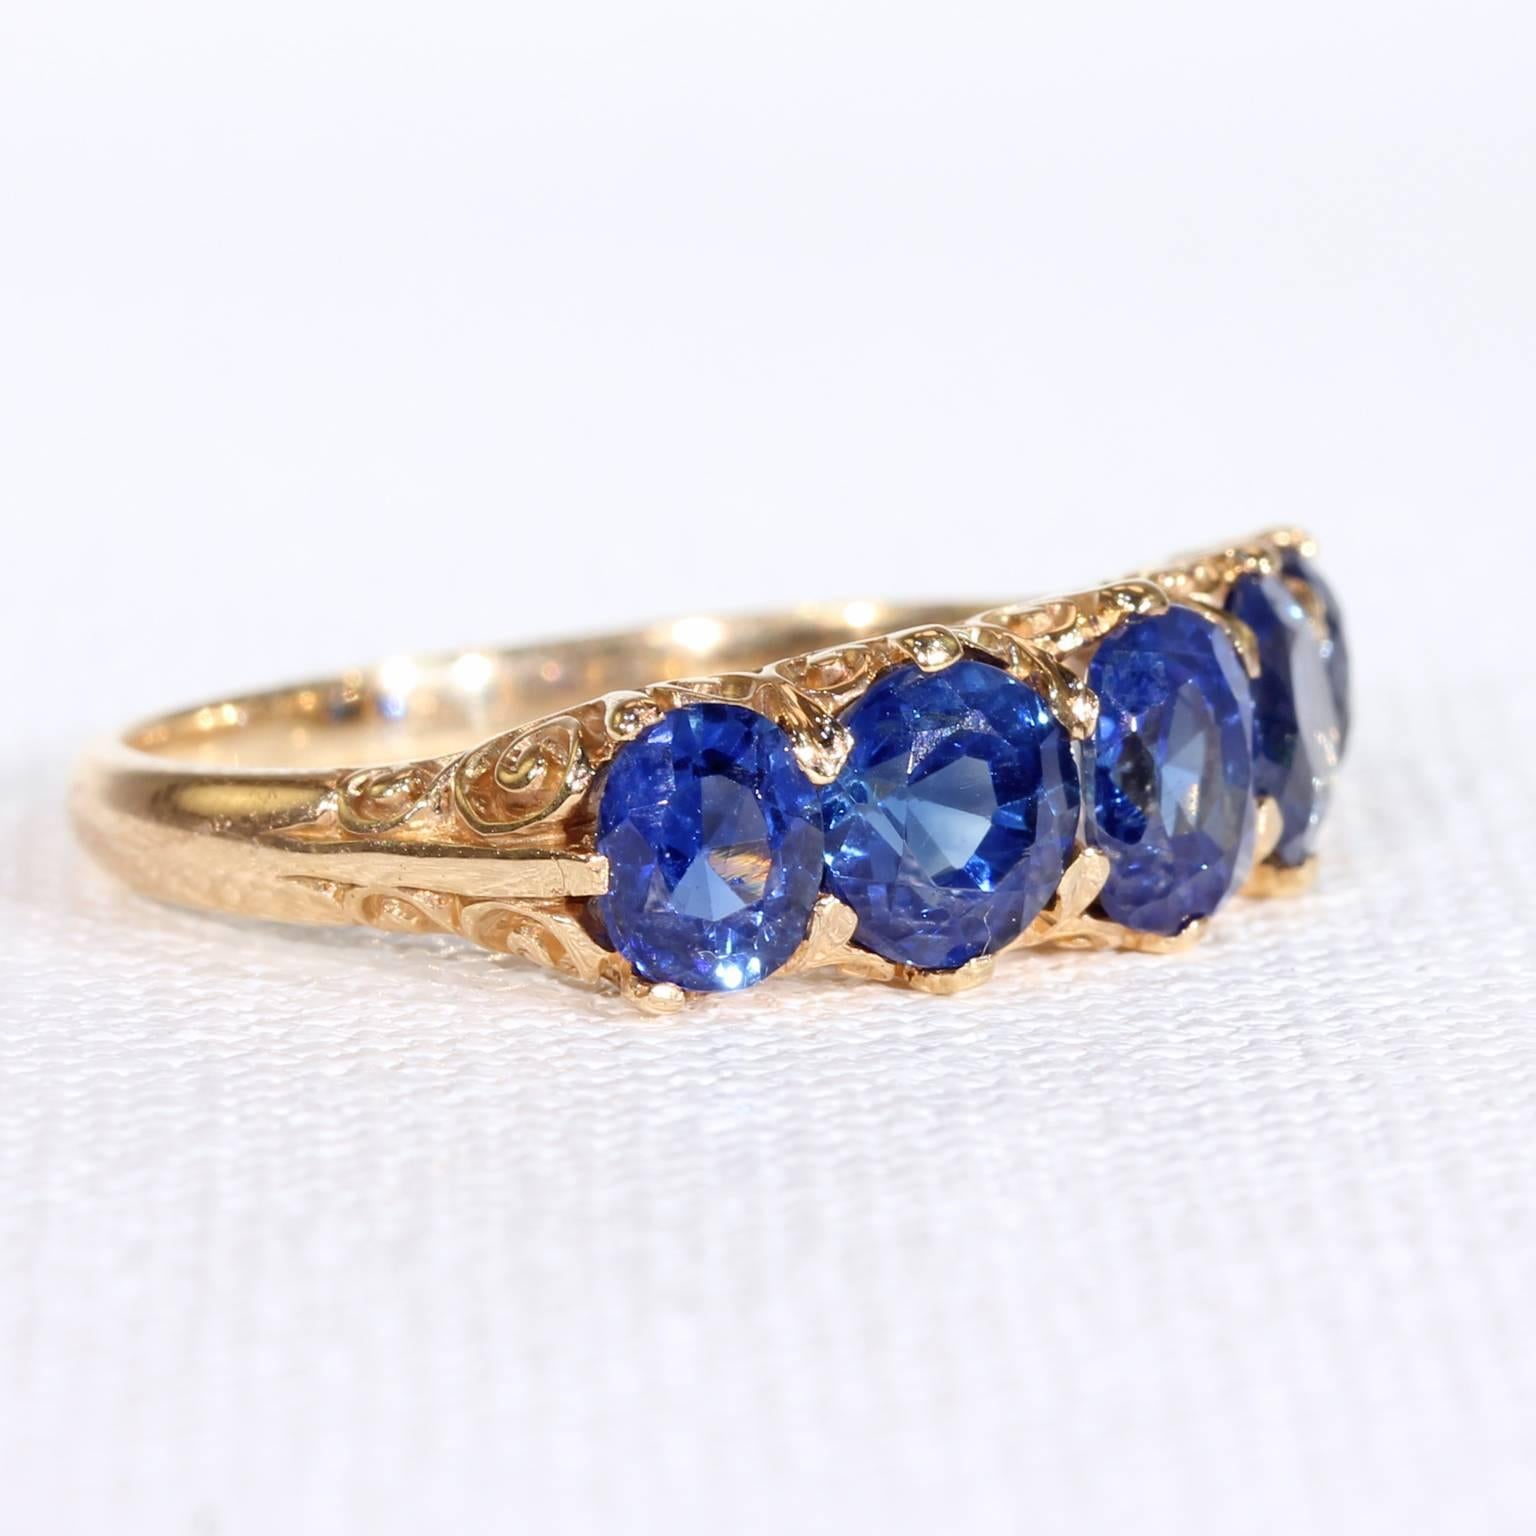 This antique Victorian natural sapphire and gold ring was handcrafted in England, around 1890. This ring holds five natural, untreated bright sapphires in a mesmerizing shade of rich cornflower blue. Together, this ring boasts 3.4  total carats of